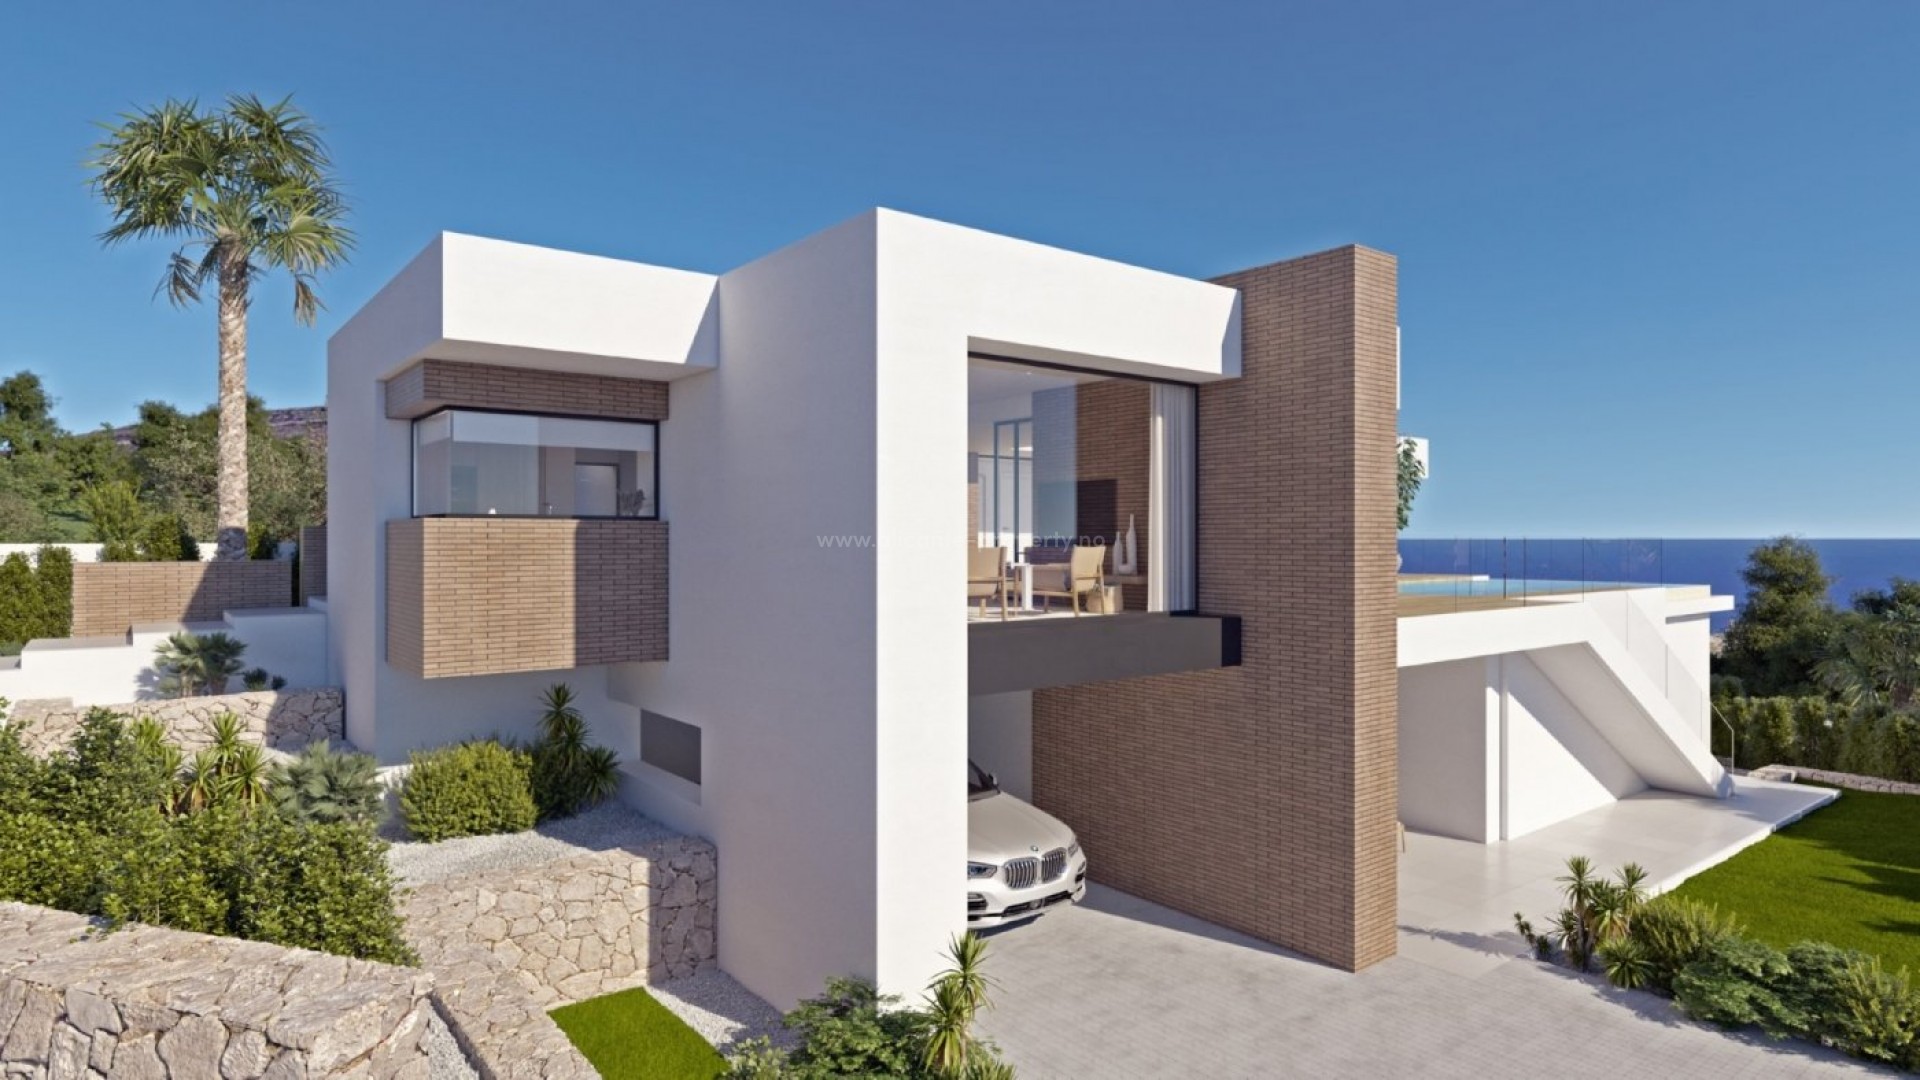 Newly built luxury villa in Benitachell, Cumbre del Sol, 3 bedrooms, 4 bathrooms, the terrace of more than 70 m² is dominated by an infinity pool, fantastic views